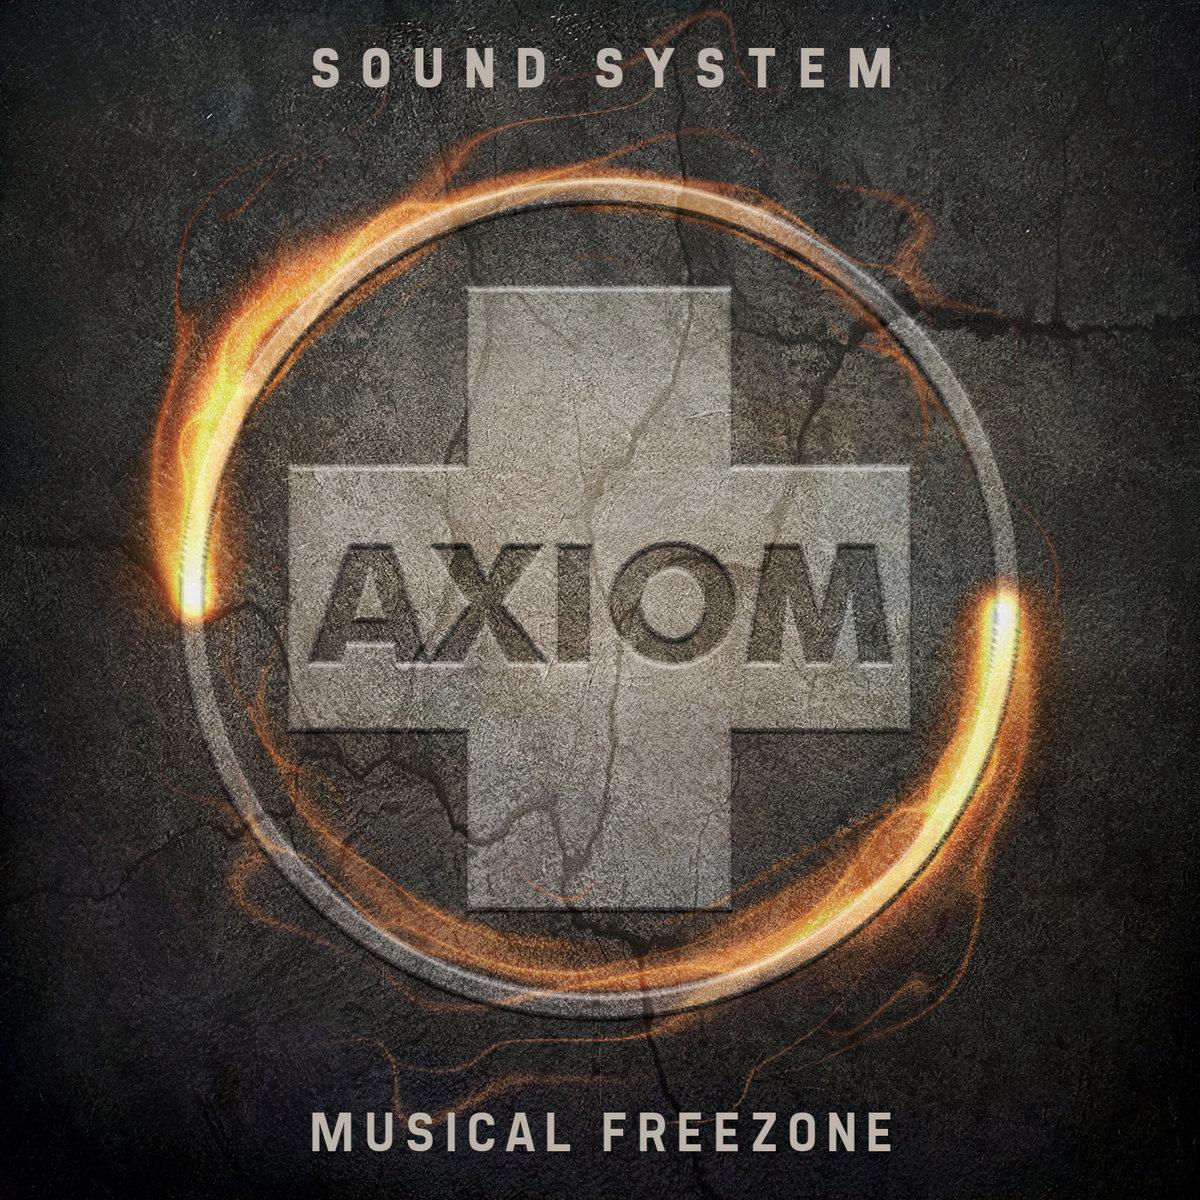 Bill Laswell - Axiom Sound System / Musical Freezone (2023) [FLAC 24bit/48kHz] Download